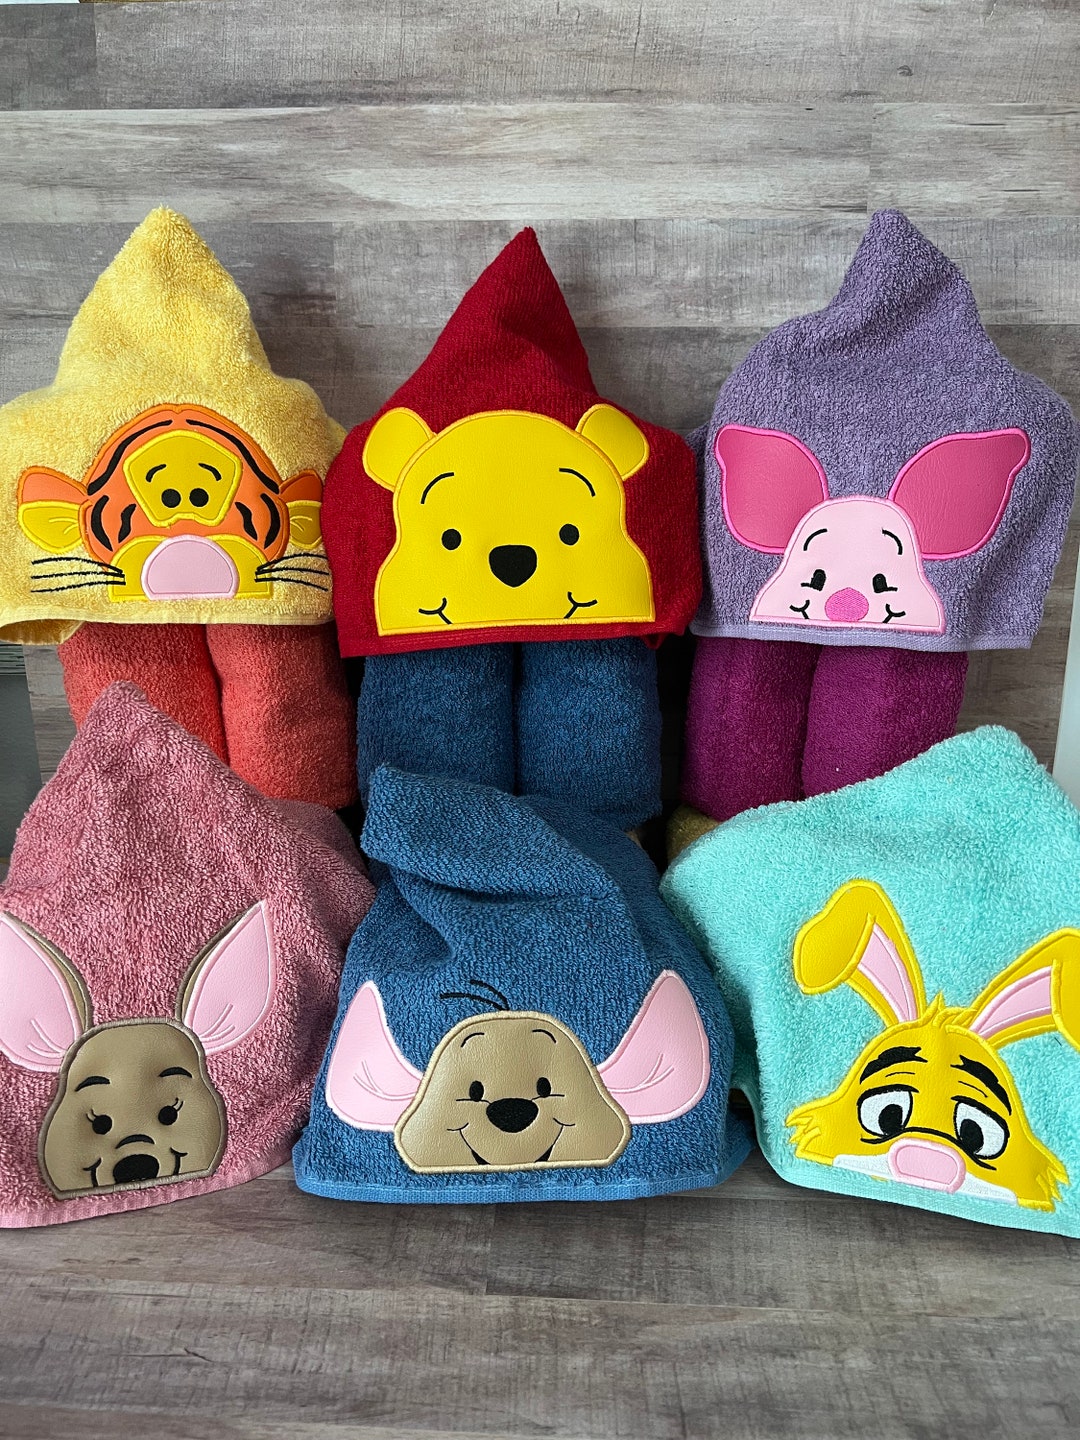 Piglet Hooded Towels for Kids, Winnie the Pooh Bath Towels for